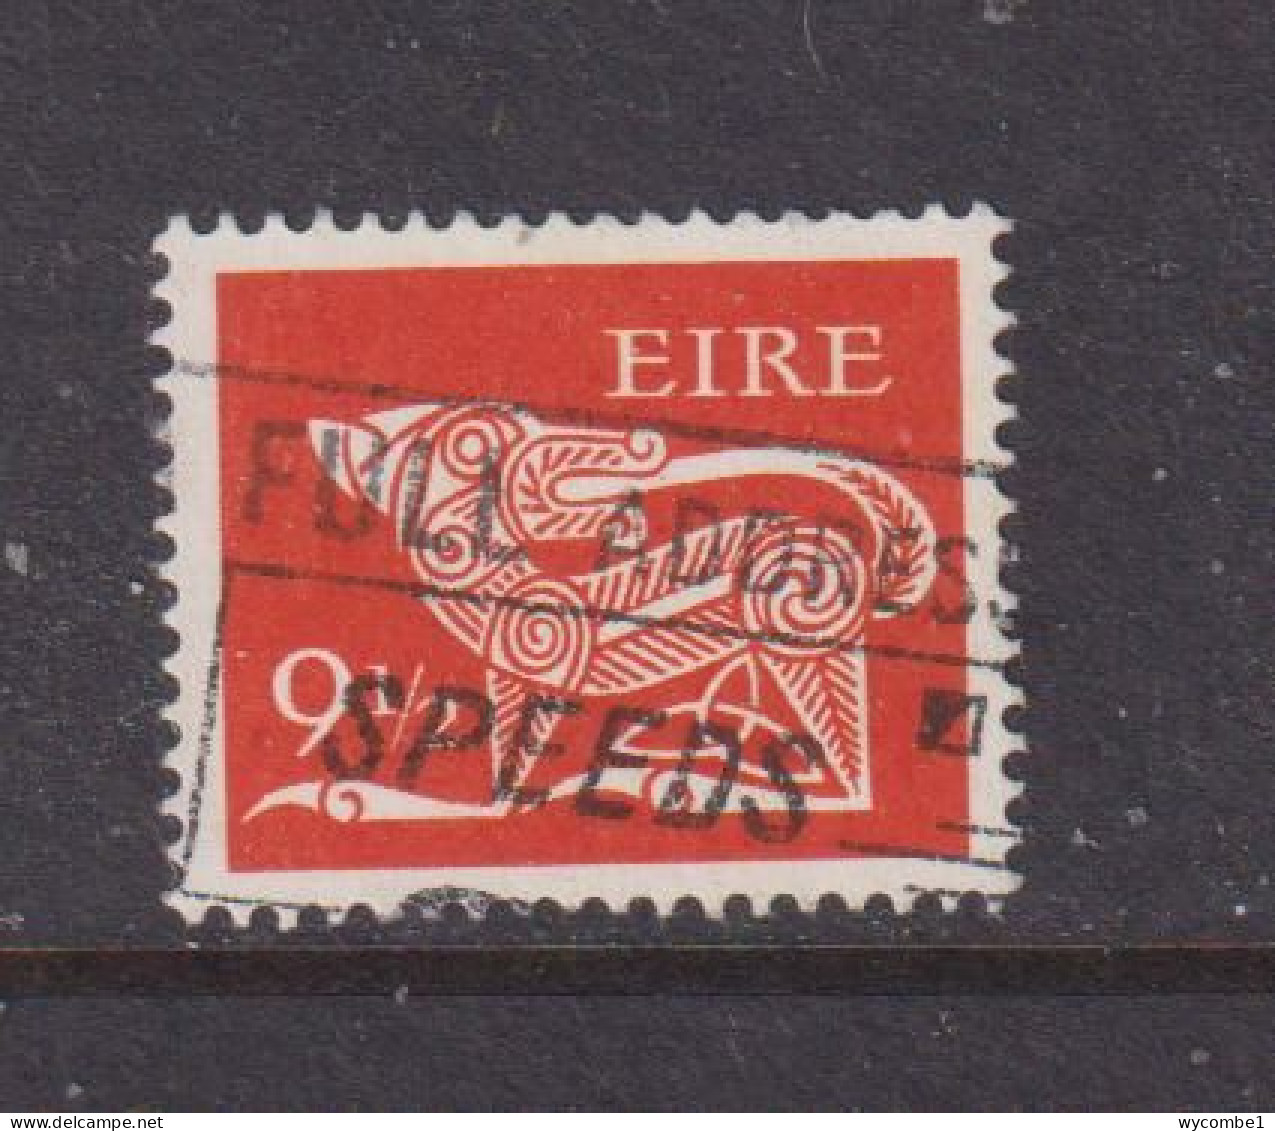 IRELAND - 1971  Decimal Currency Definitives  91/2p  Used As Scan - Usados